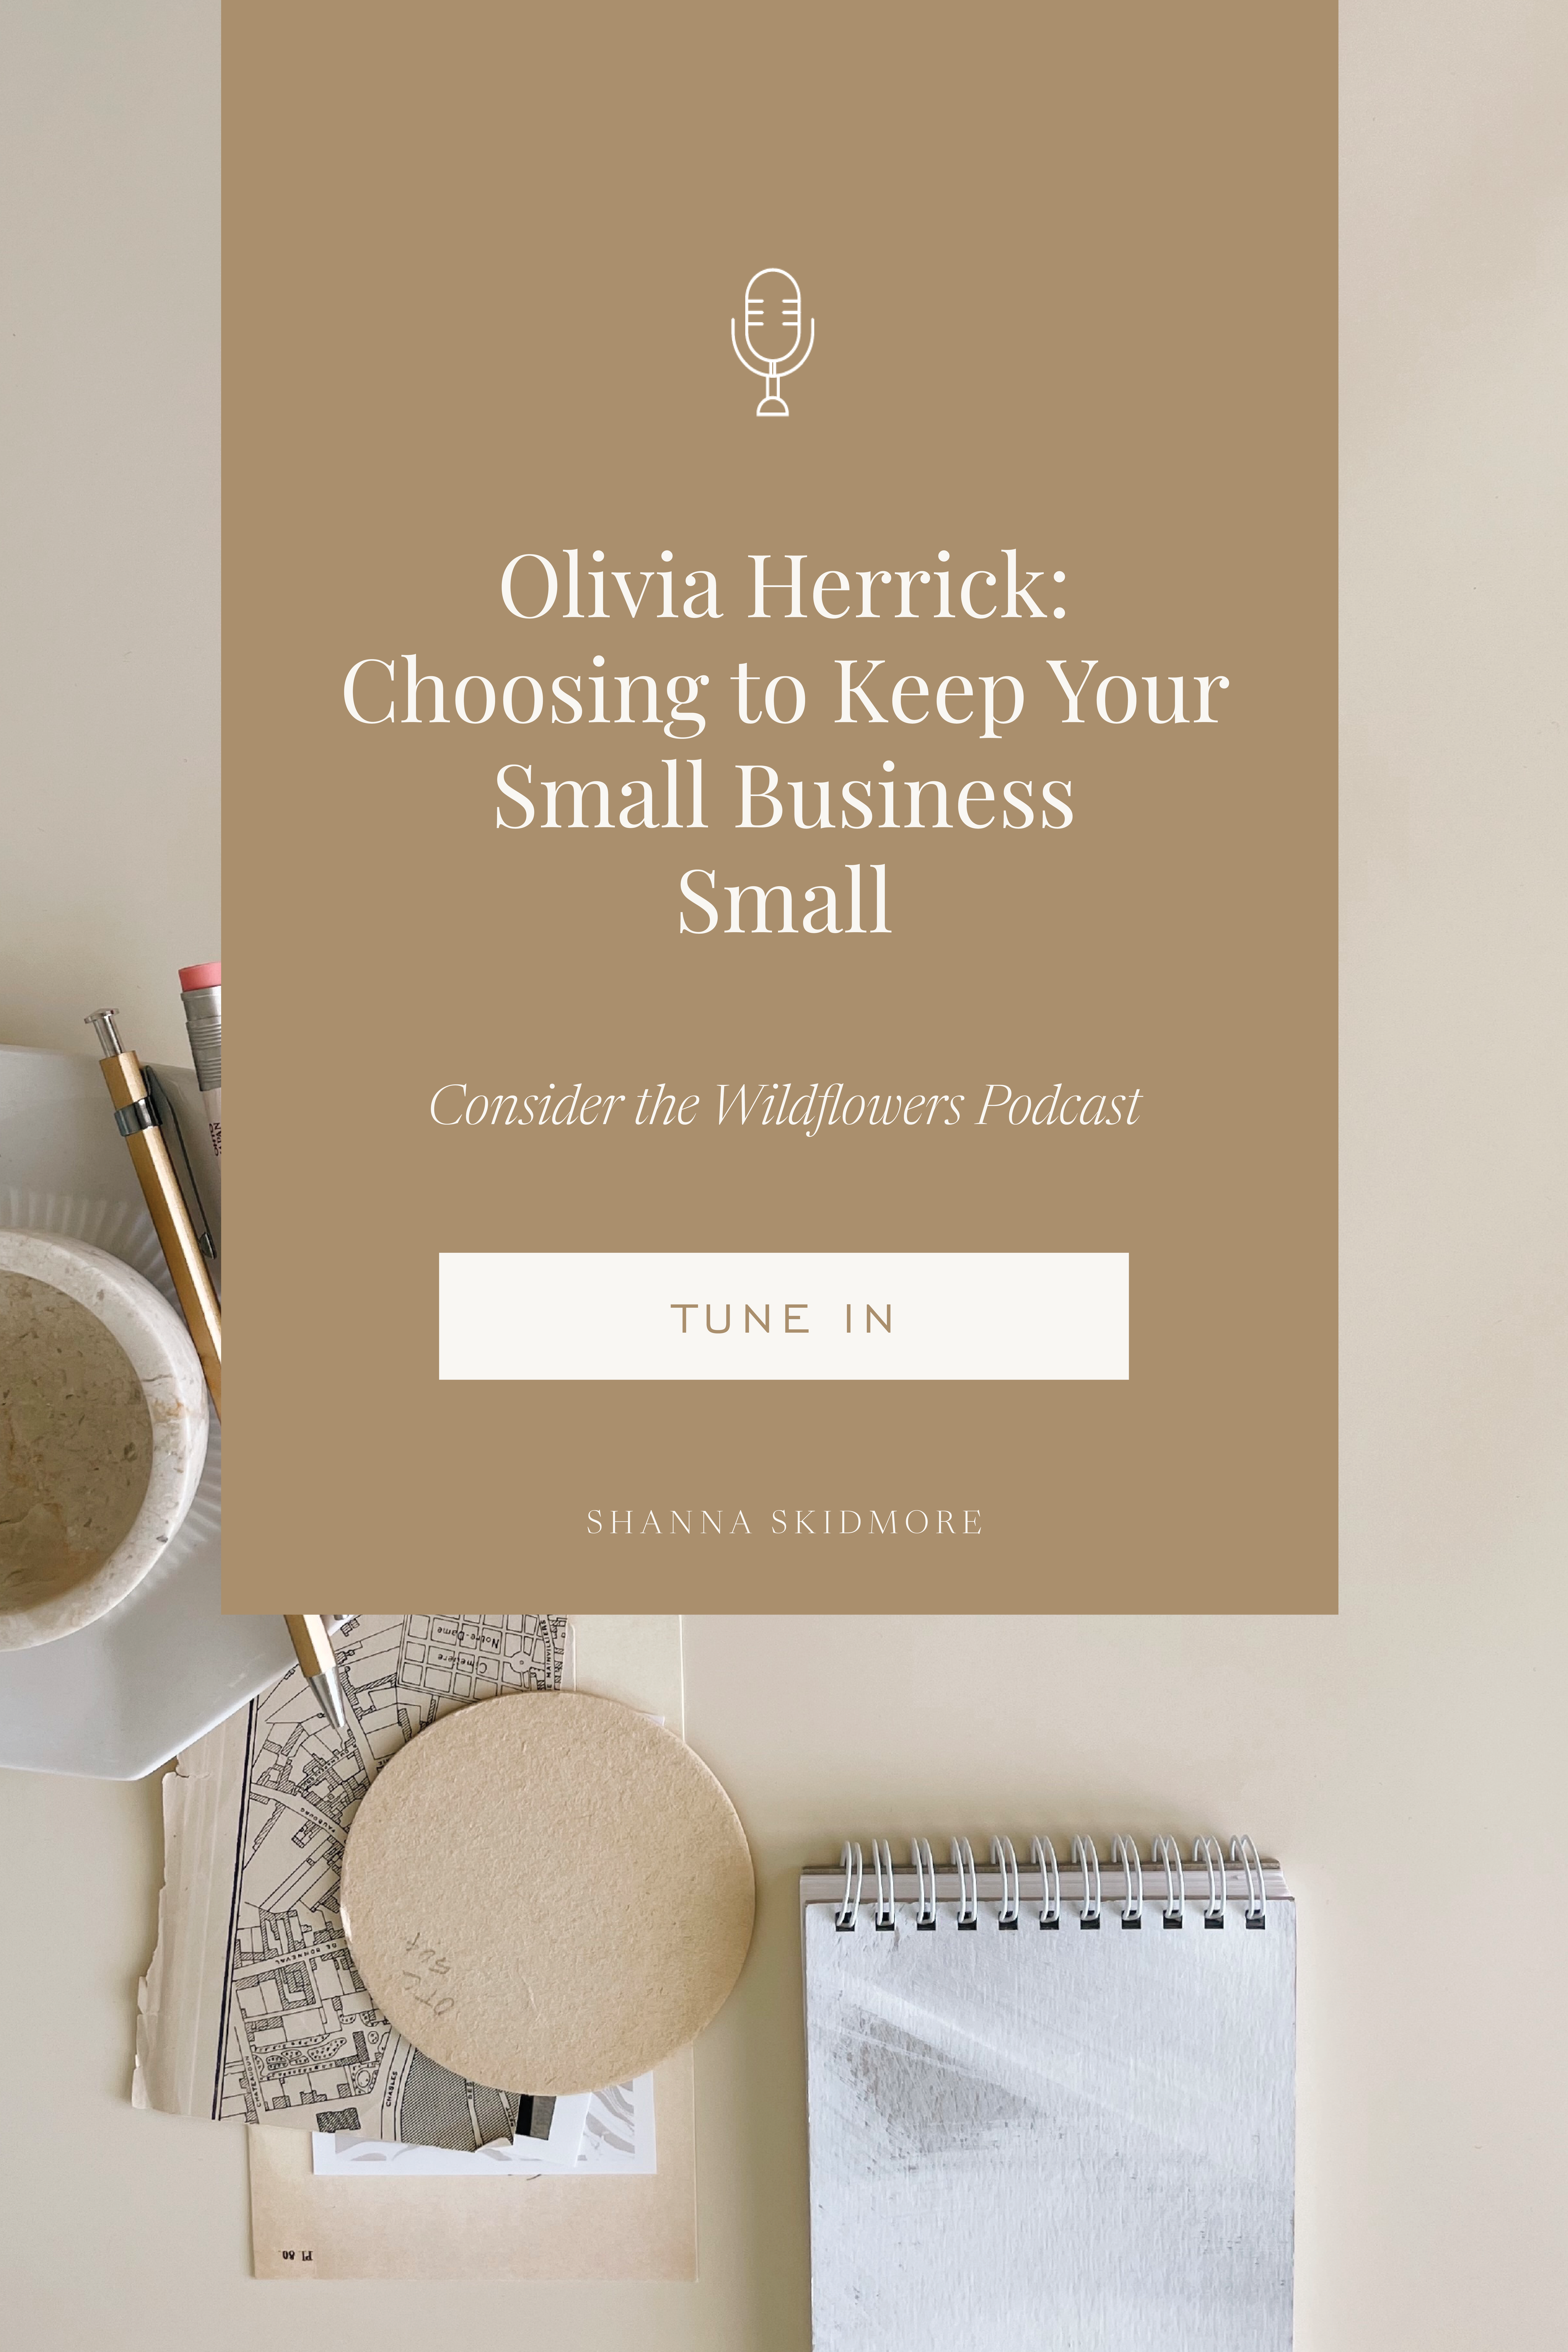 Flat lay of neutral office items with caption: Olivia Herrick: Choosing to Keep Your Small Business Small